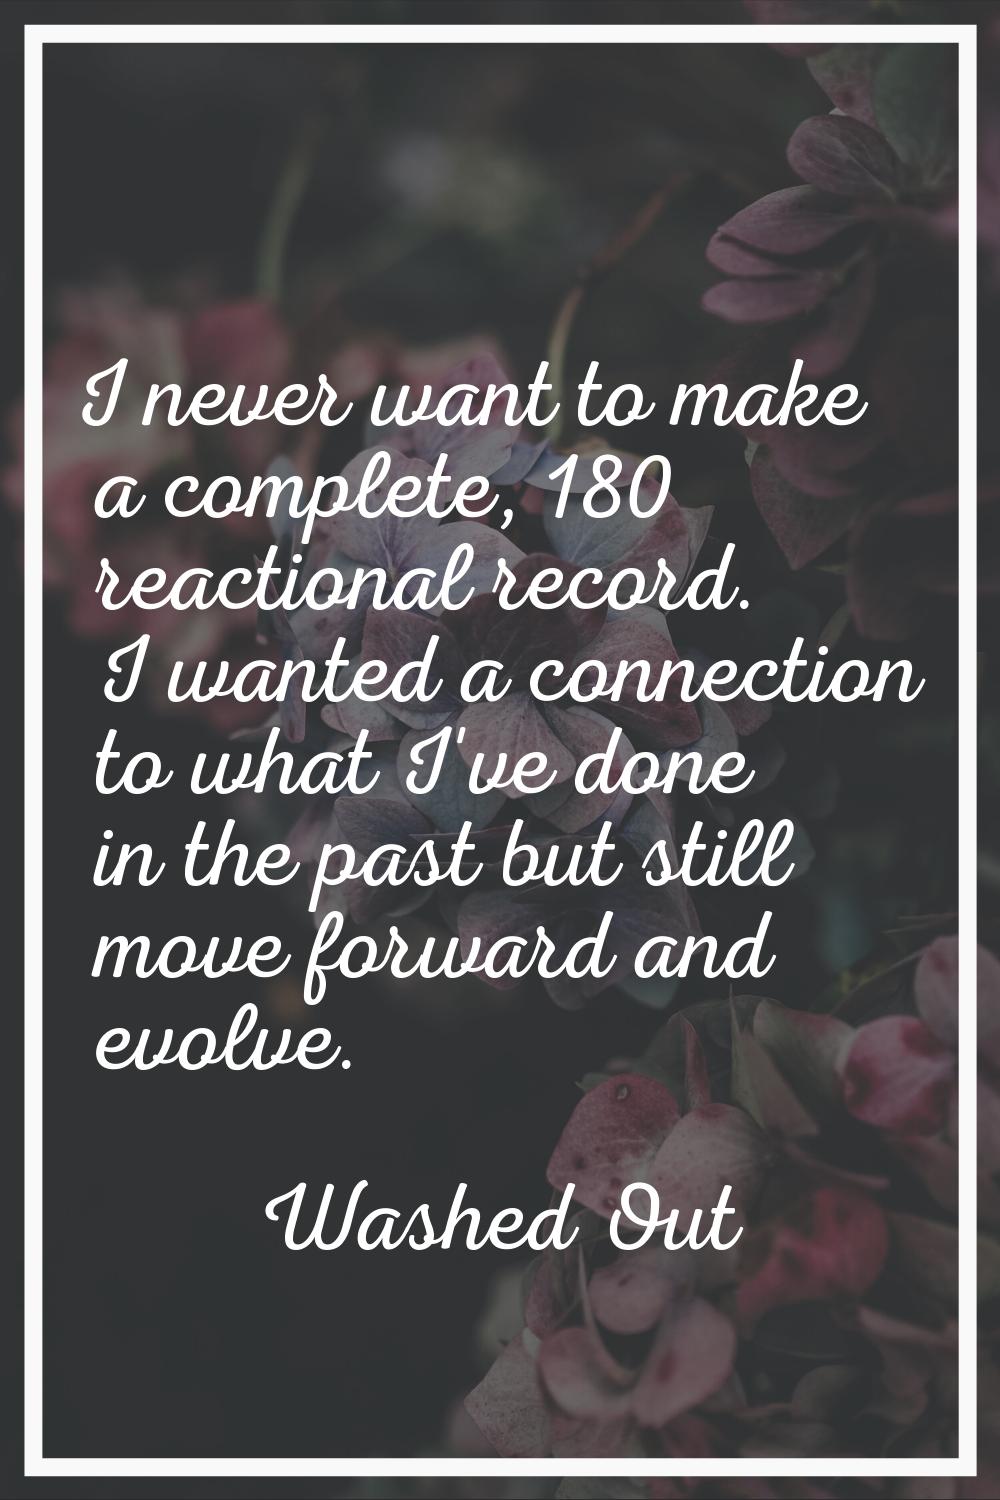 I never want to make a complete, 180 reactional record. I wanted a connection to what I've done in 